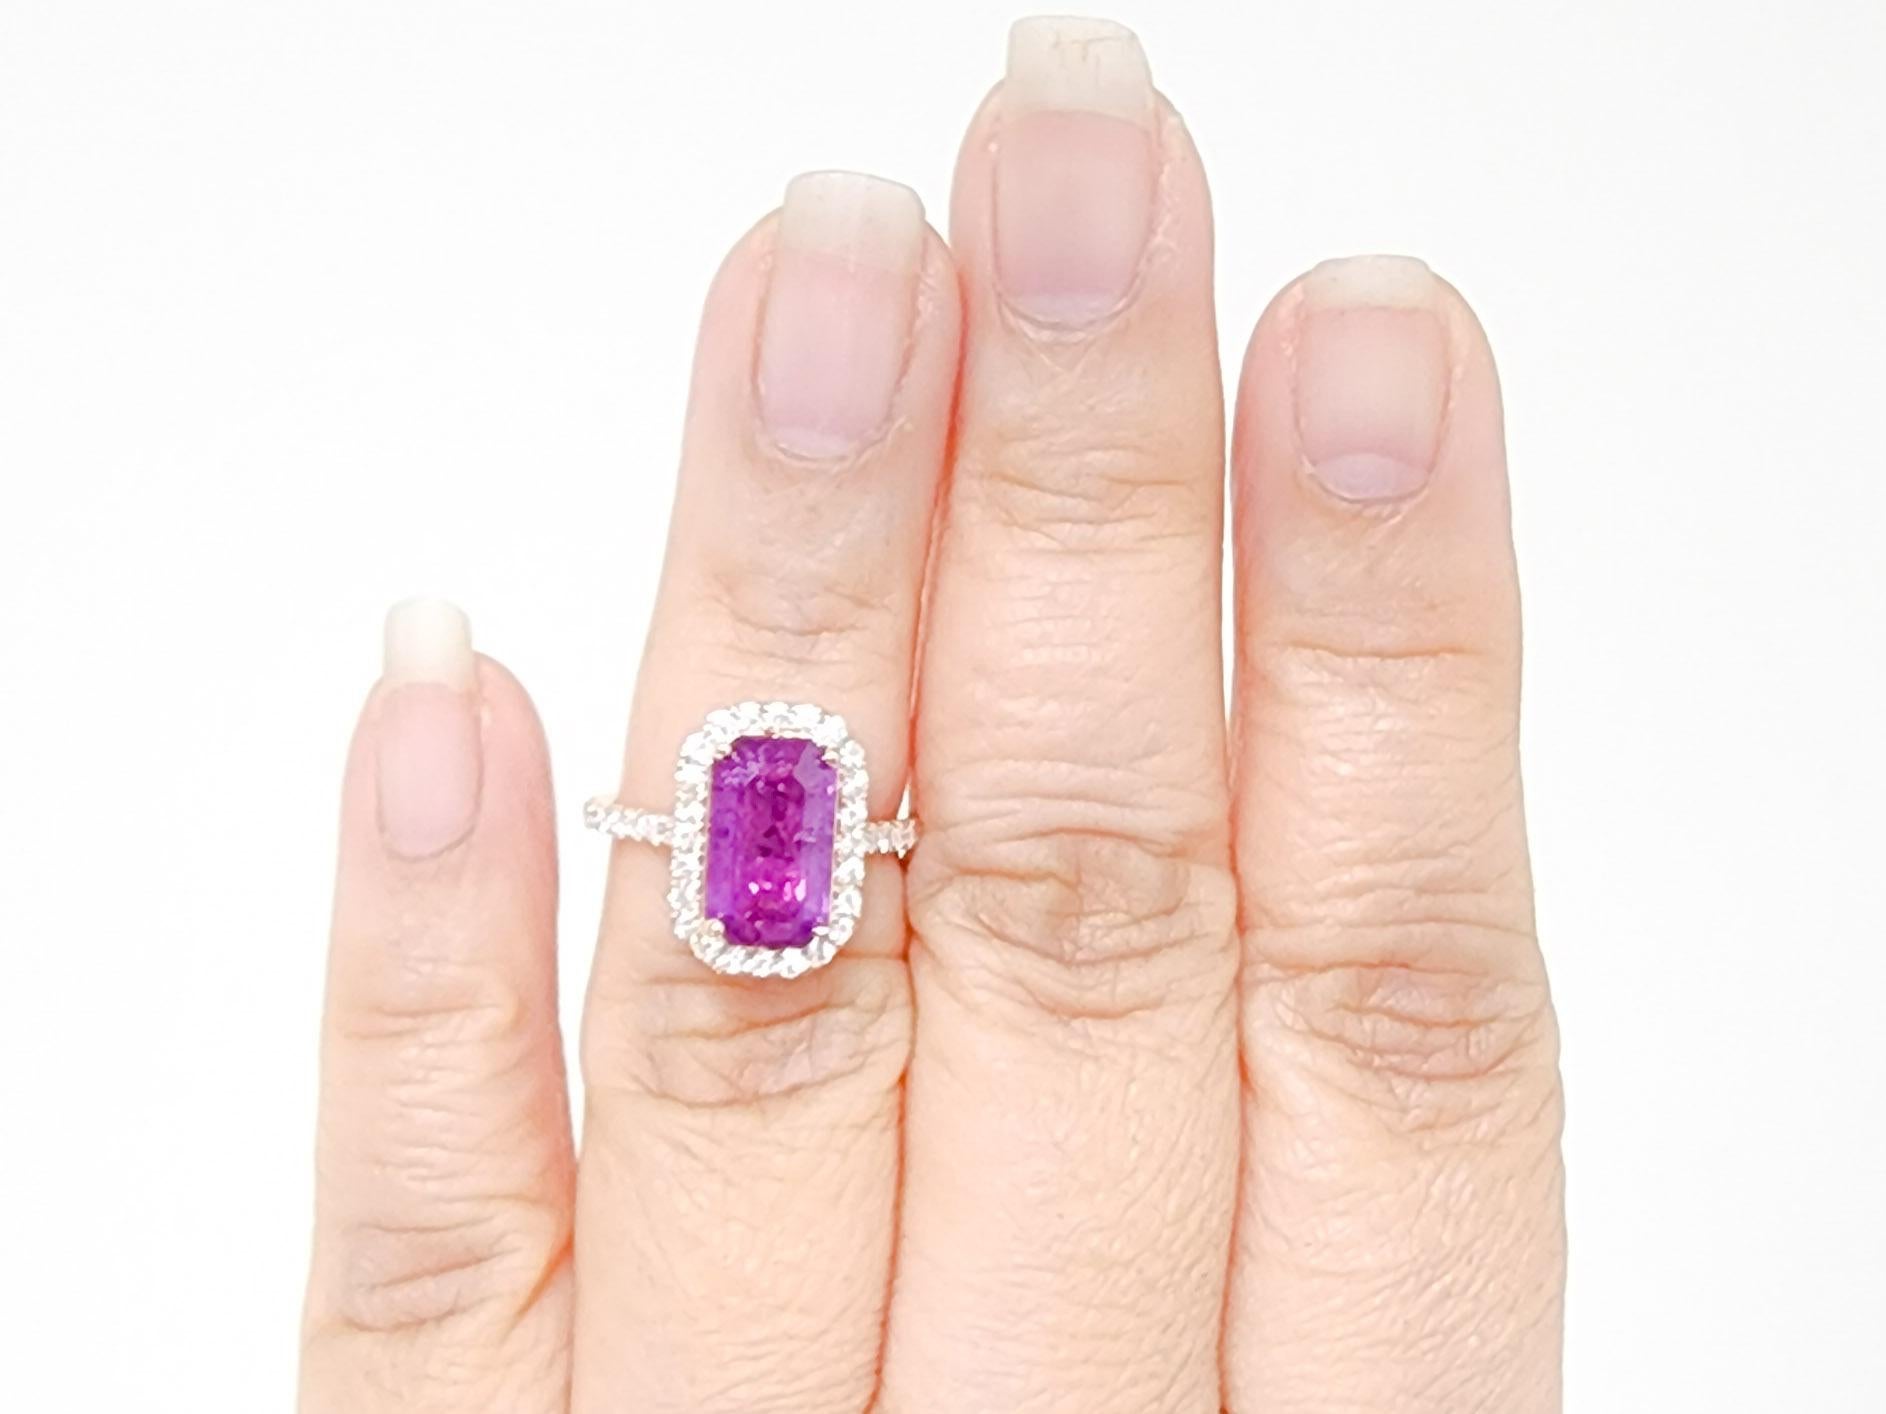 Gorgeous 3.75 ct. Sri Lanka unheated pink purple sapphire octagon with 0.60 ct. good quality white diamond rounds.  Handmade in 18k rose gold.  Ring size 6.5.
GIA certificate included.